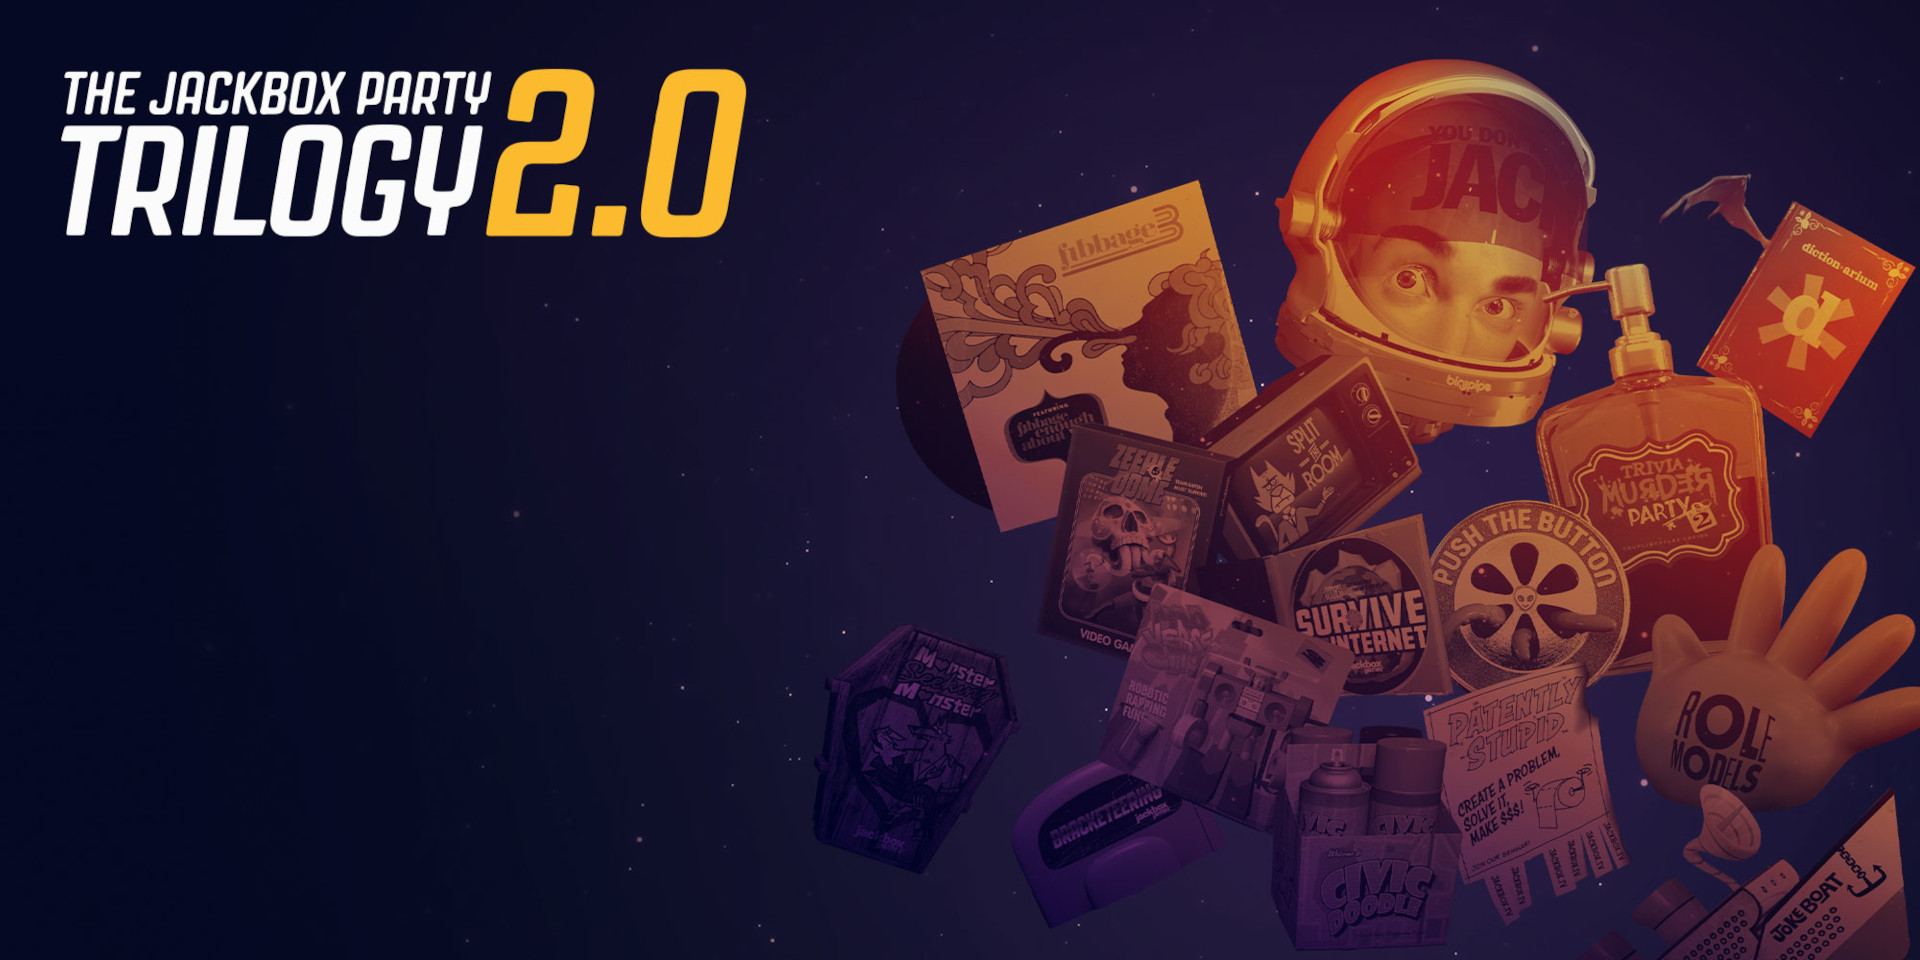 The Jackbox Party Pack Trilogy 2.0 Steam CD Key, $47.83